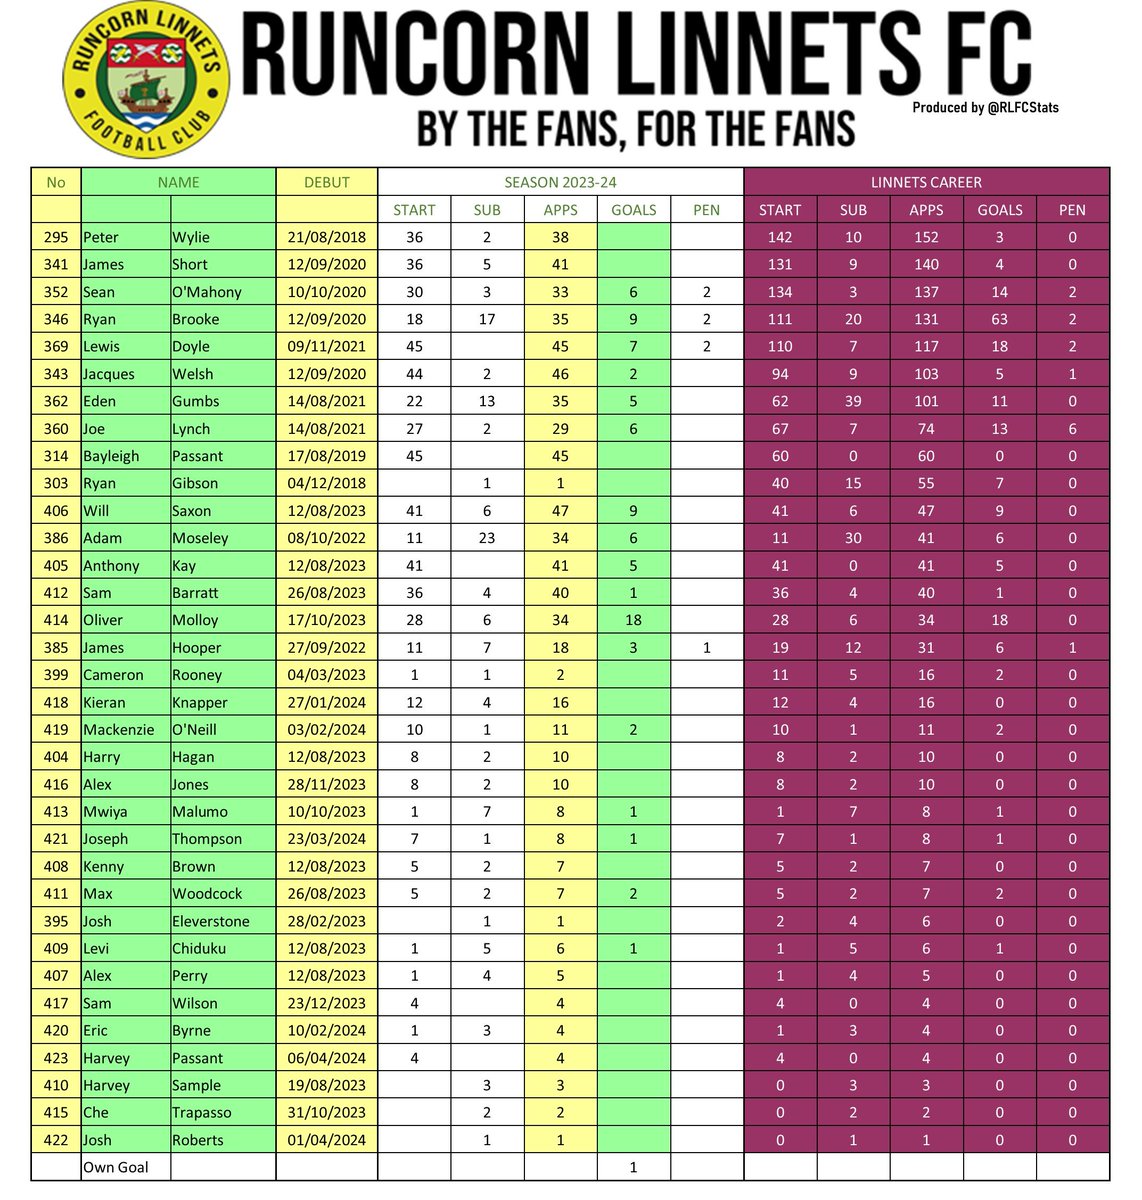 End of season stats for @RuncornLinnets. Sincere best wishes to Billy for his next chapter. I'm ashamed by some of the comments I've seen from some of our 'fans'. He deserves so much better.